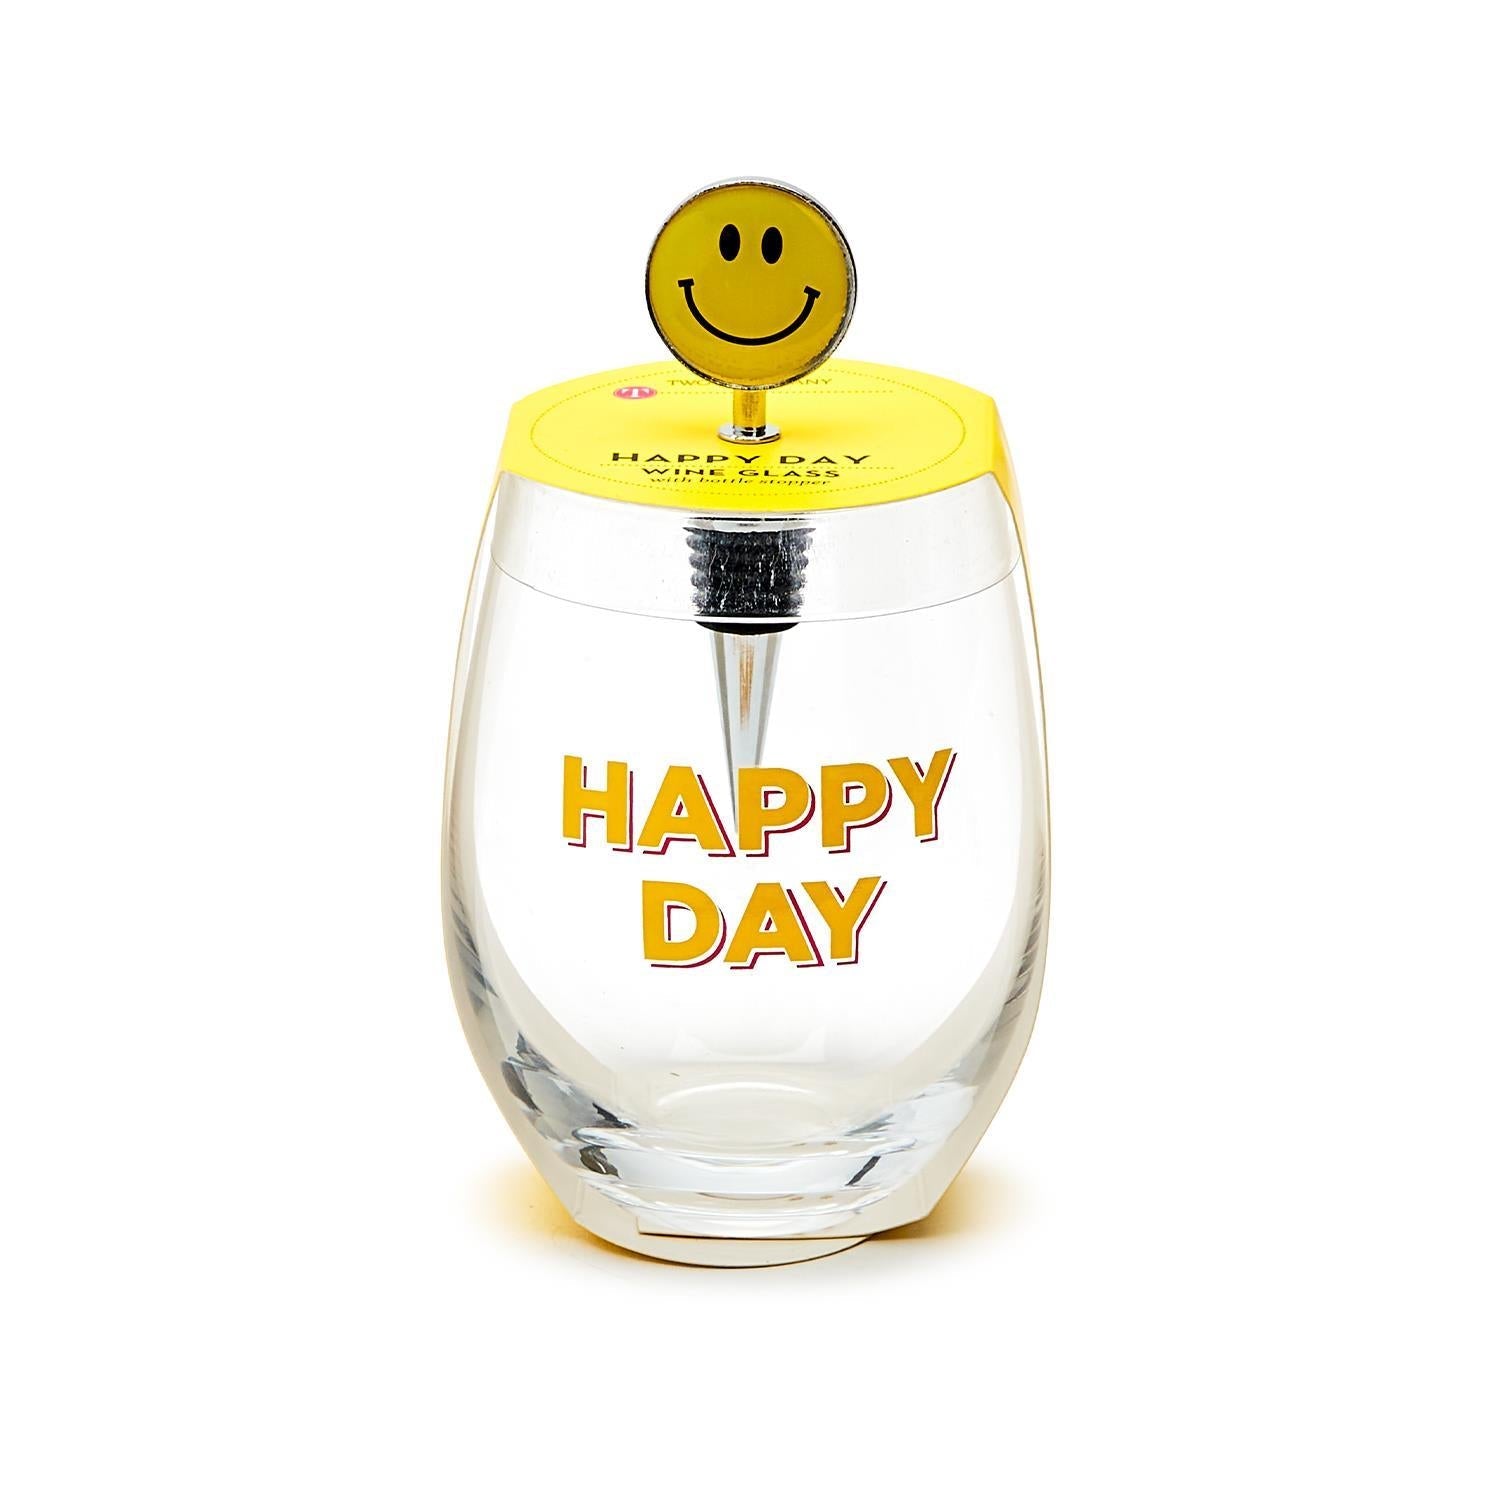 Happy Day Stemless Wine Glass with Smile Face Wine Stopper